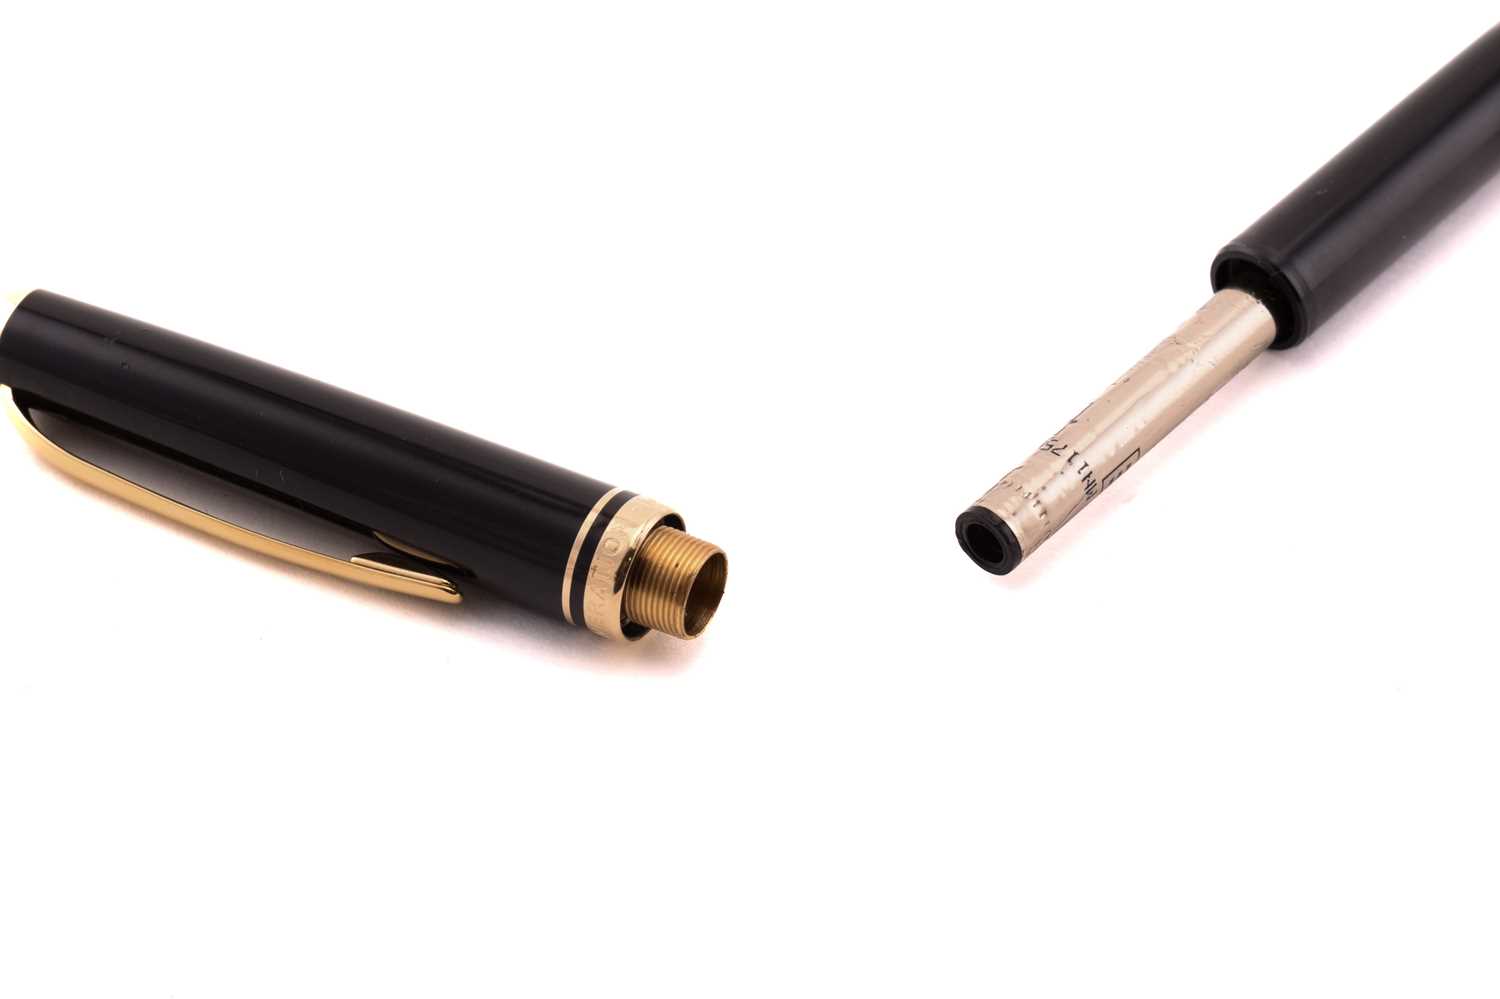 Montblanc - A rollerball pen, a pair of cufflinks and matching tie bar, all boxed; A Generation - Image 10 of 10